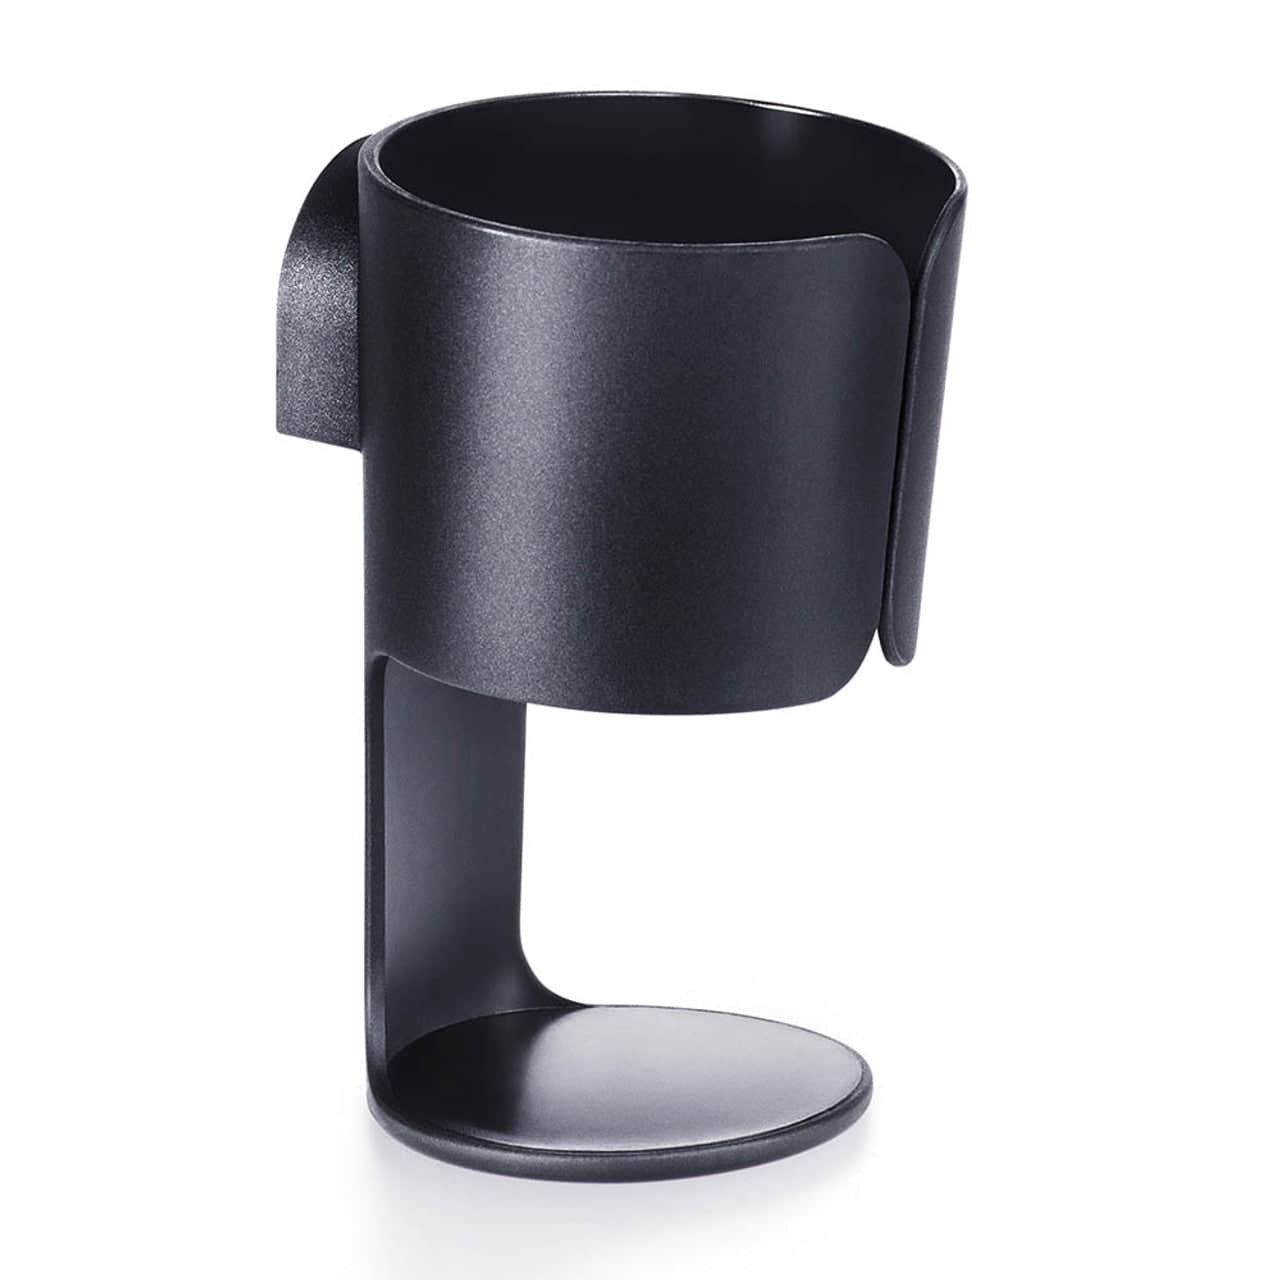 Cybex Cup Holder - Black - For Your Little One